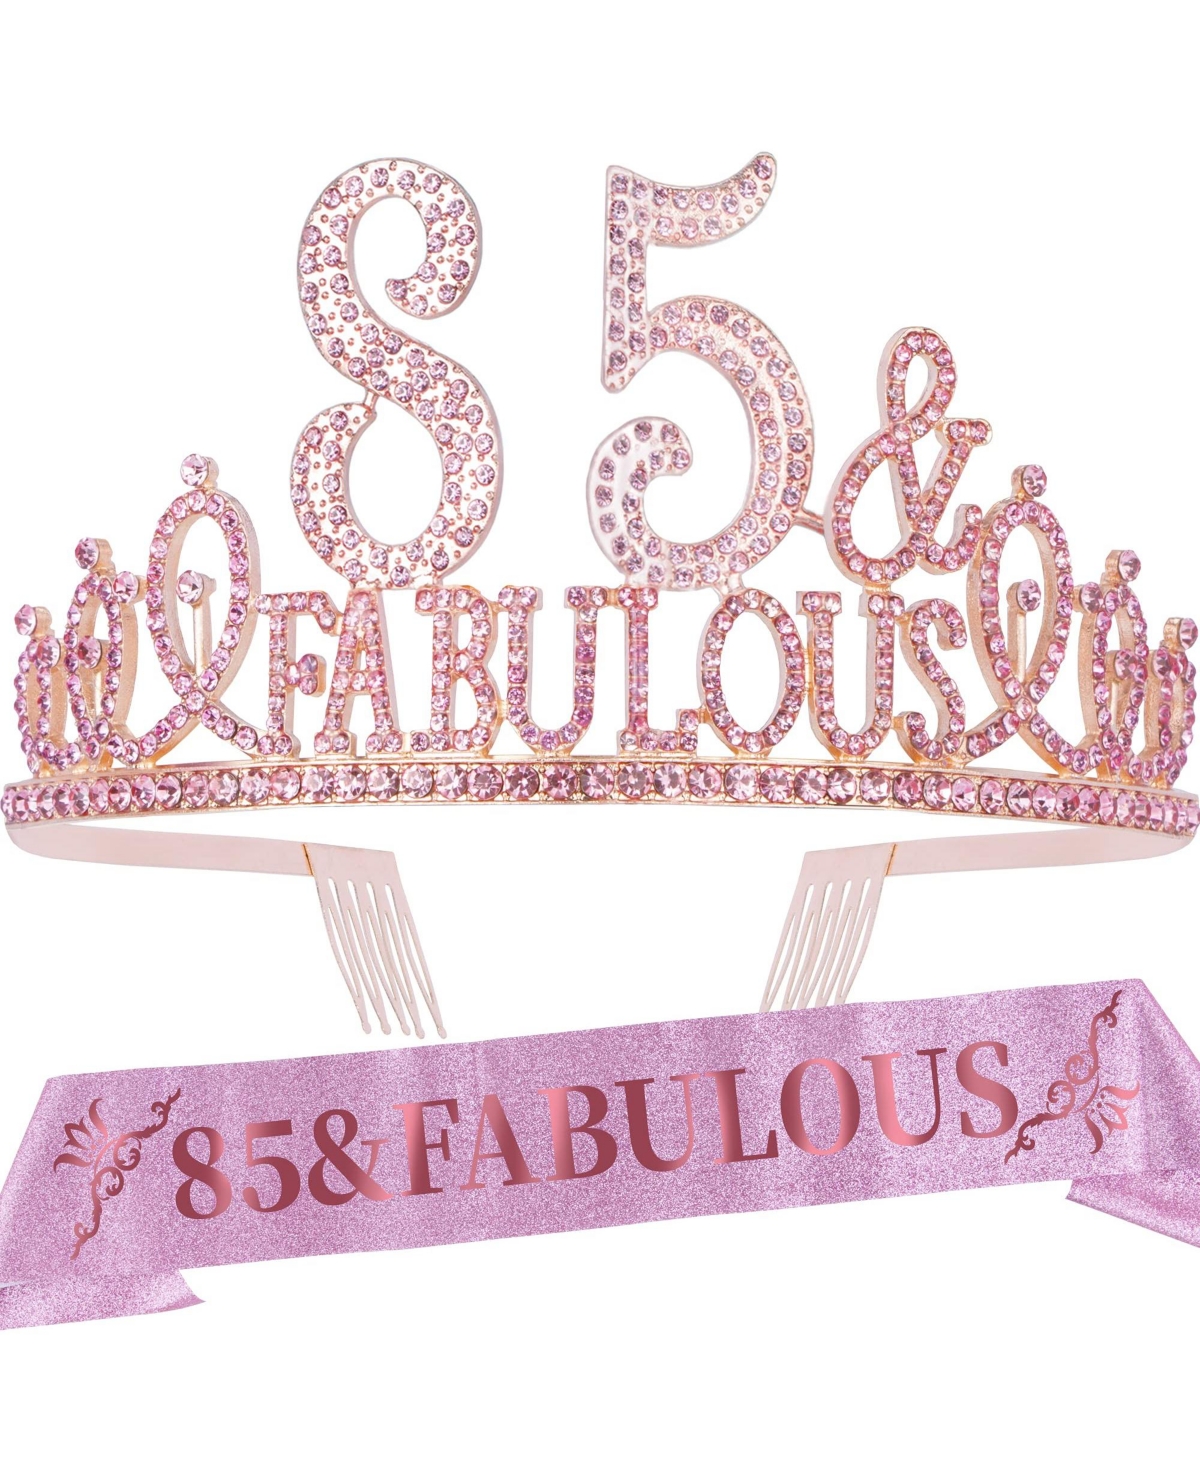 85th Birthday Sash and Tiara for Women, Elegant Party Favors and Gifts, Queen-Themed Celebration Decorations, Milestone Year Crown and Sash Set - Pink